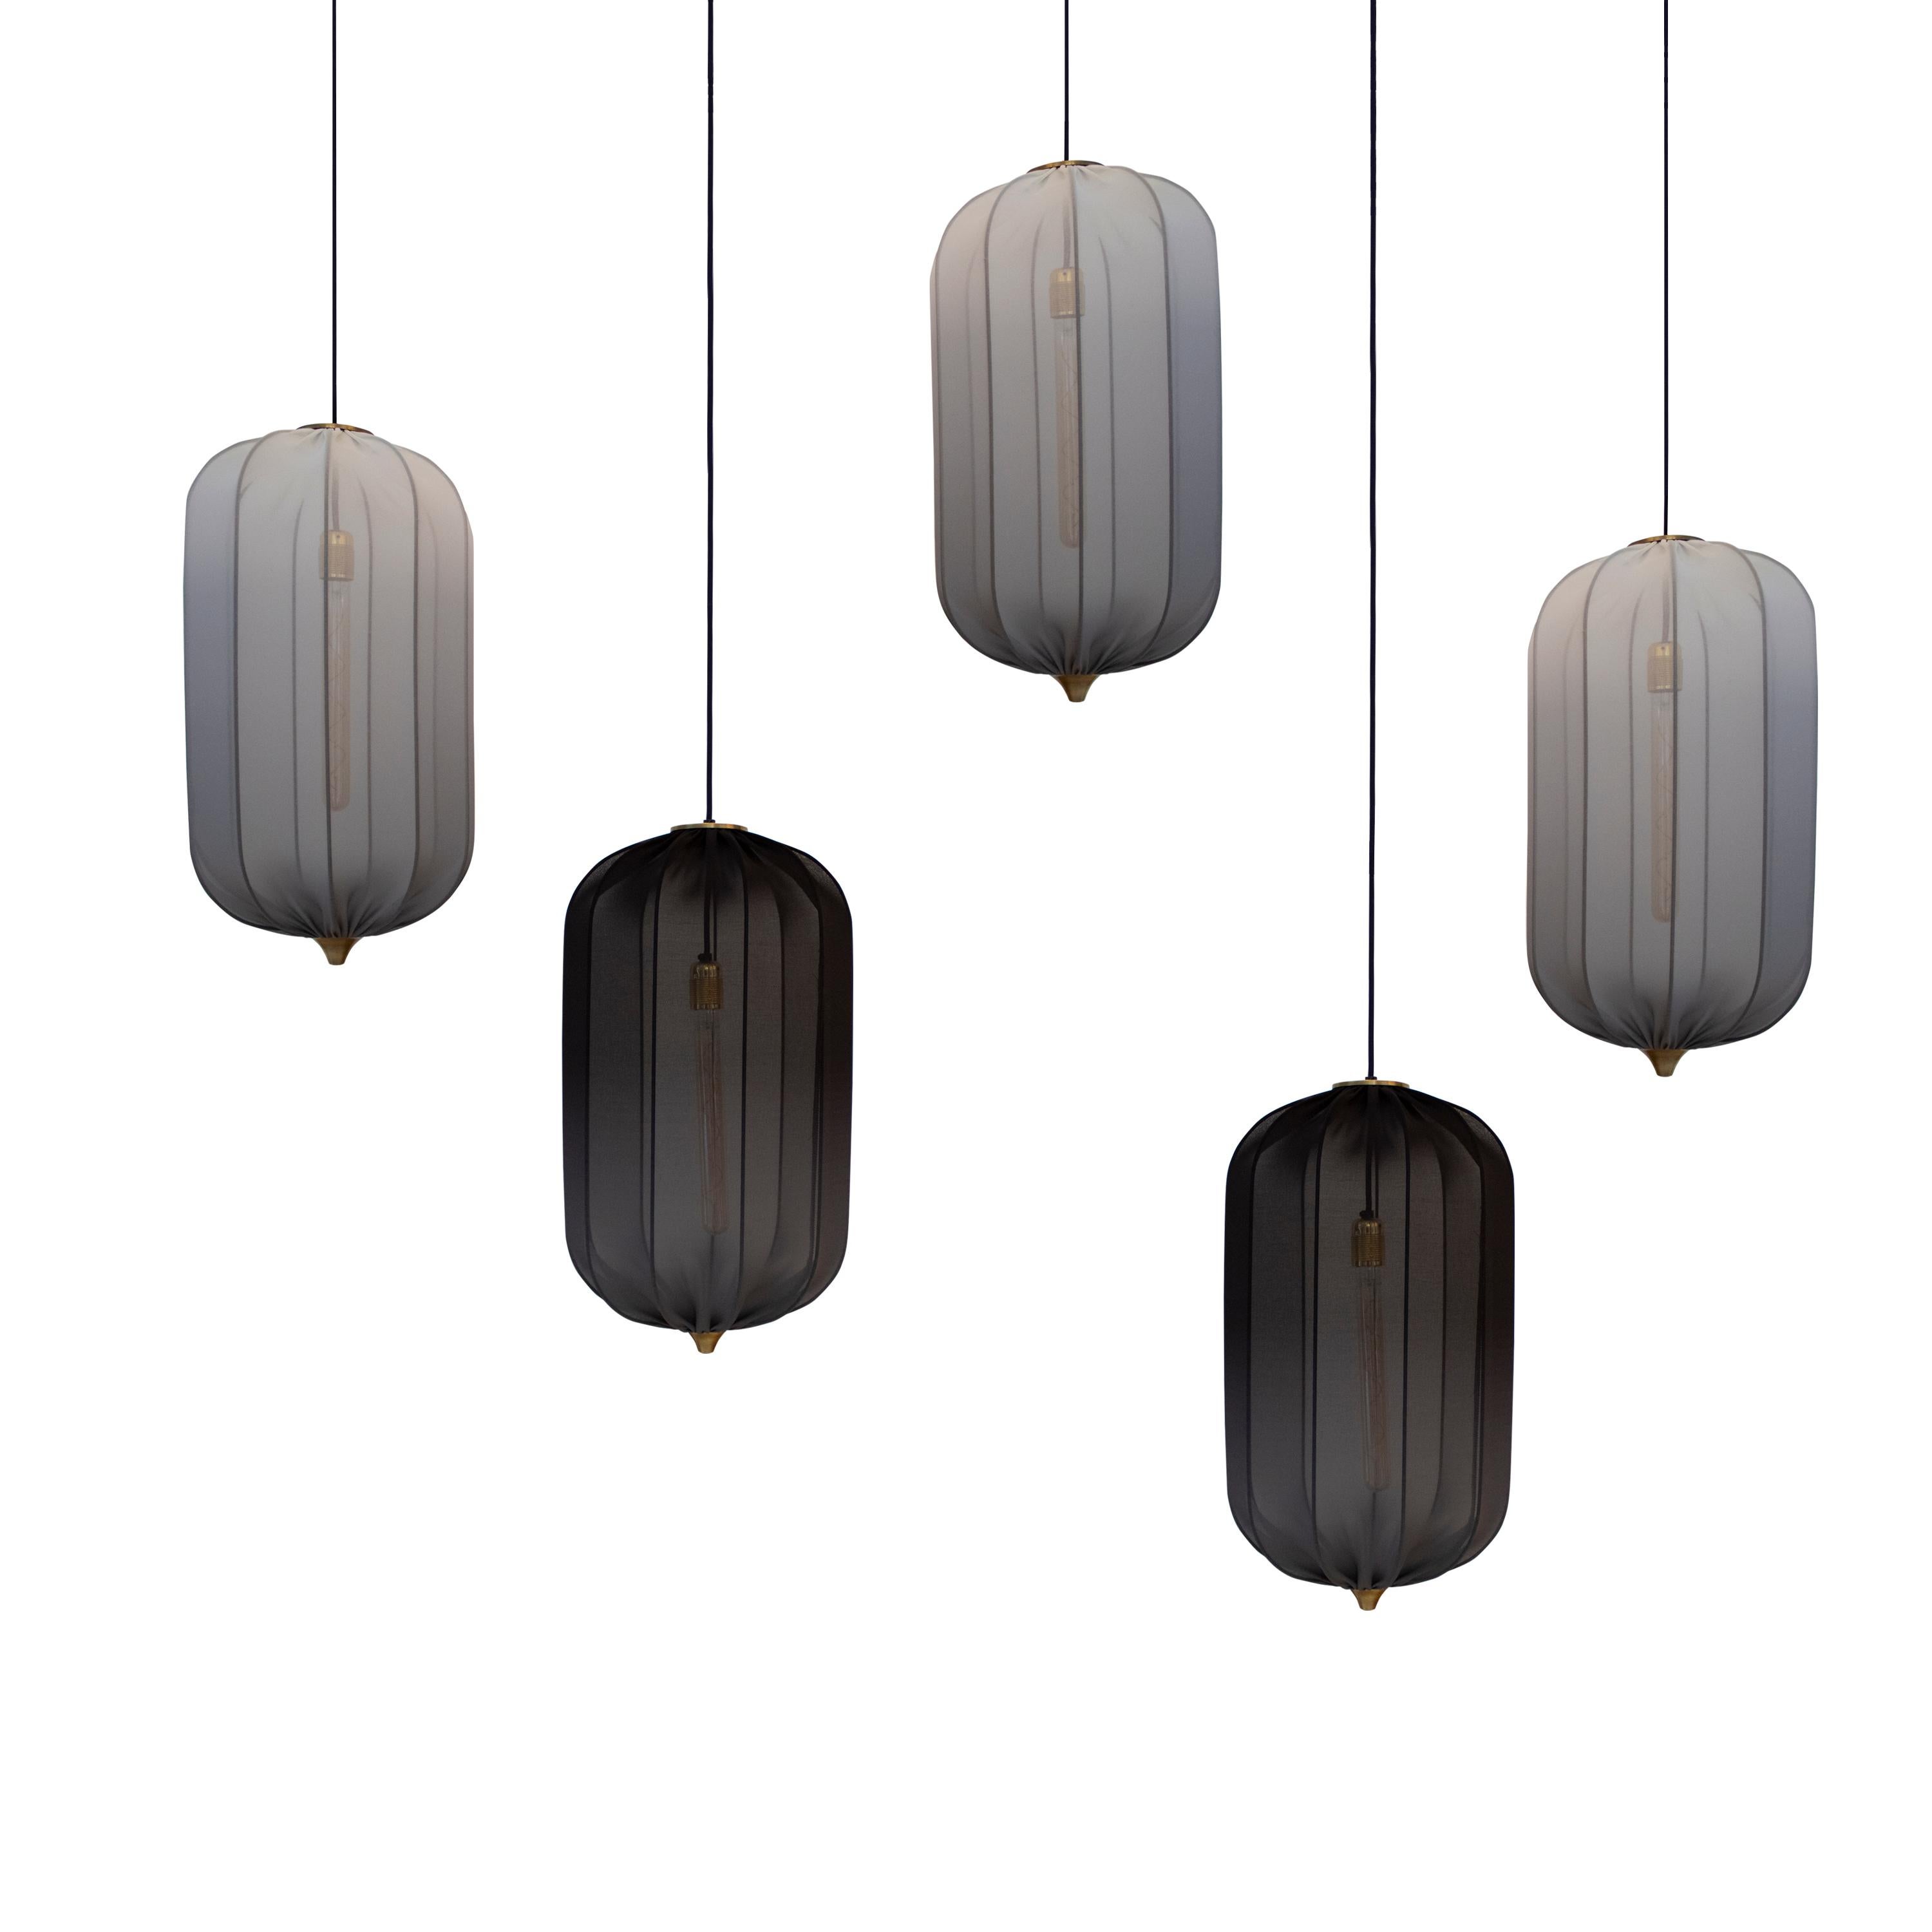 Set of five Tulip-shaped ceiling lamps designed by IKB191 in grey and black. The lamps consist of a brass structure upholstered in faded semi-transparent elastane adjustable fabric, with brass cone details and a charcoal light bulb.